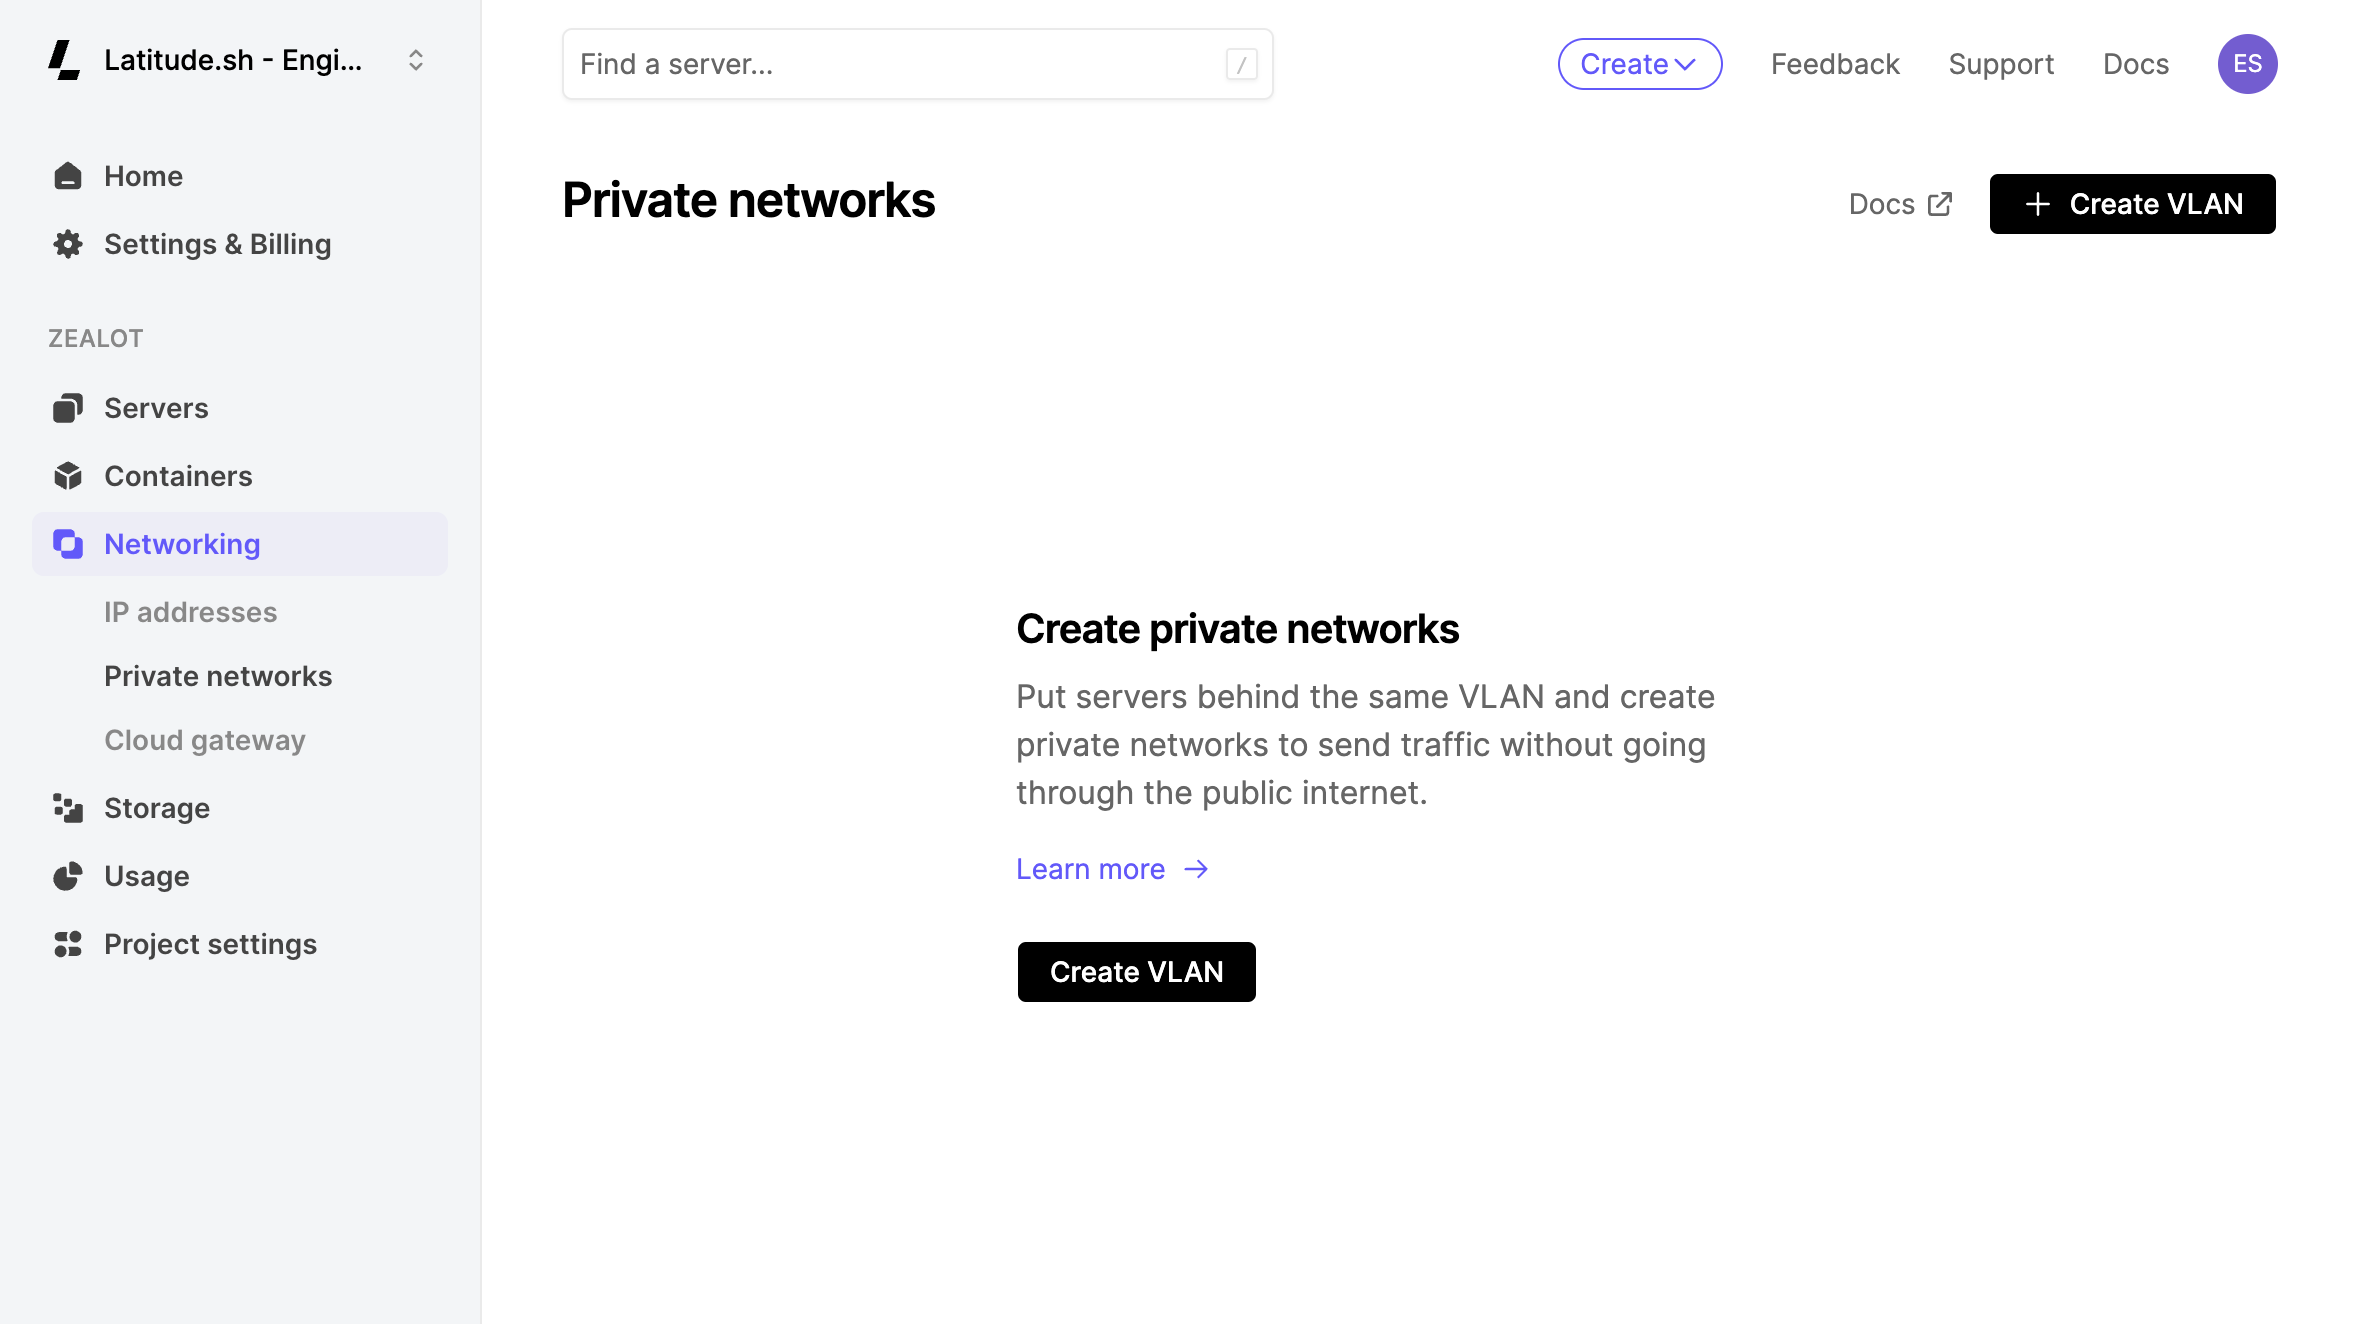 Creating a Private Network from the Latitude.sh dashboard